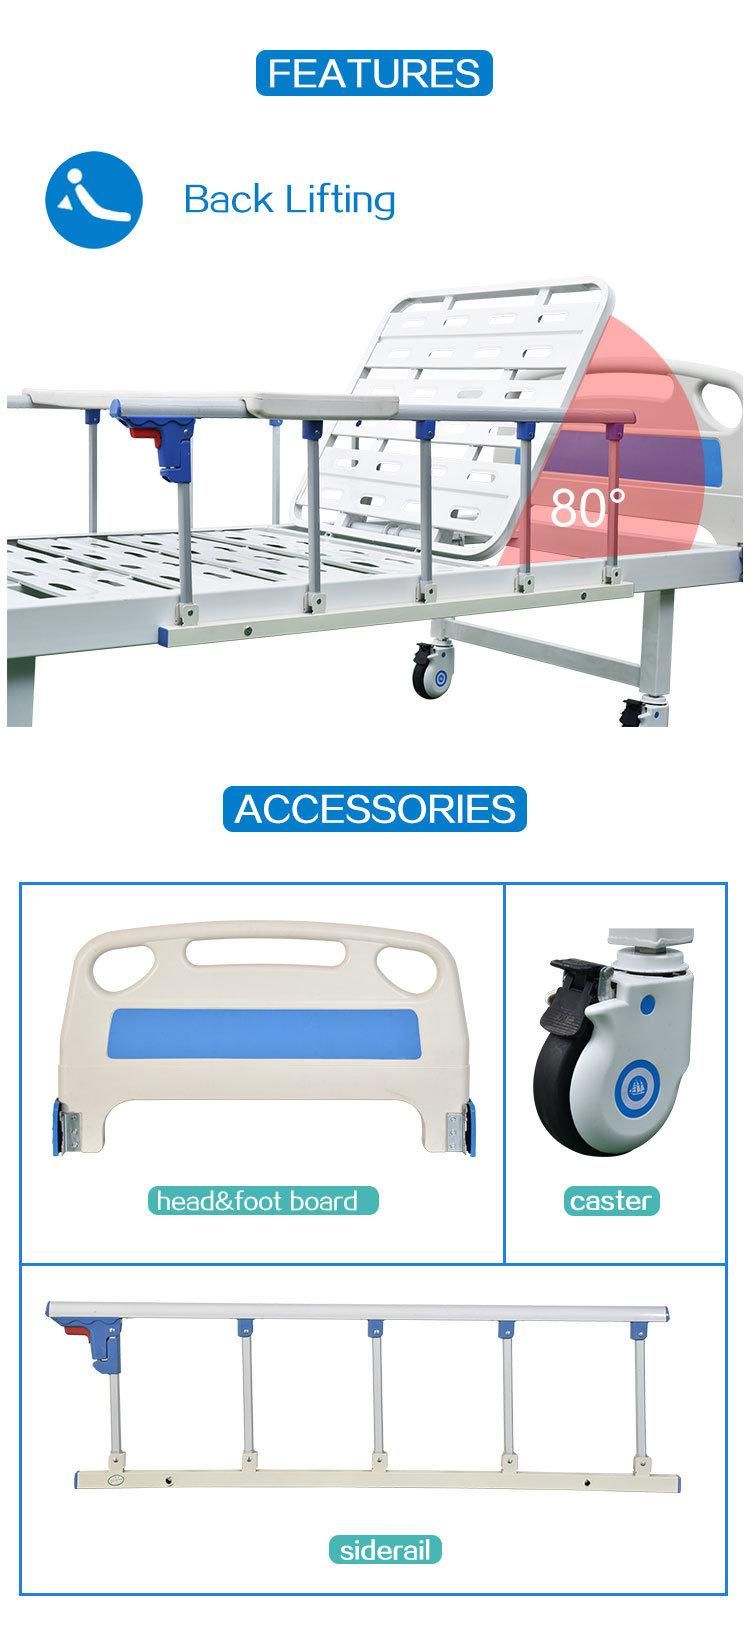 Metal Hospital Manual Bed with 1 Function for Patient Use